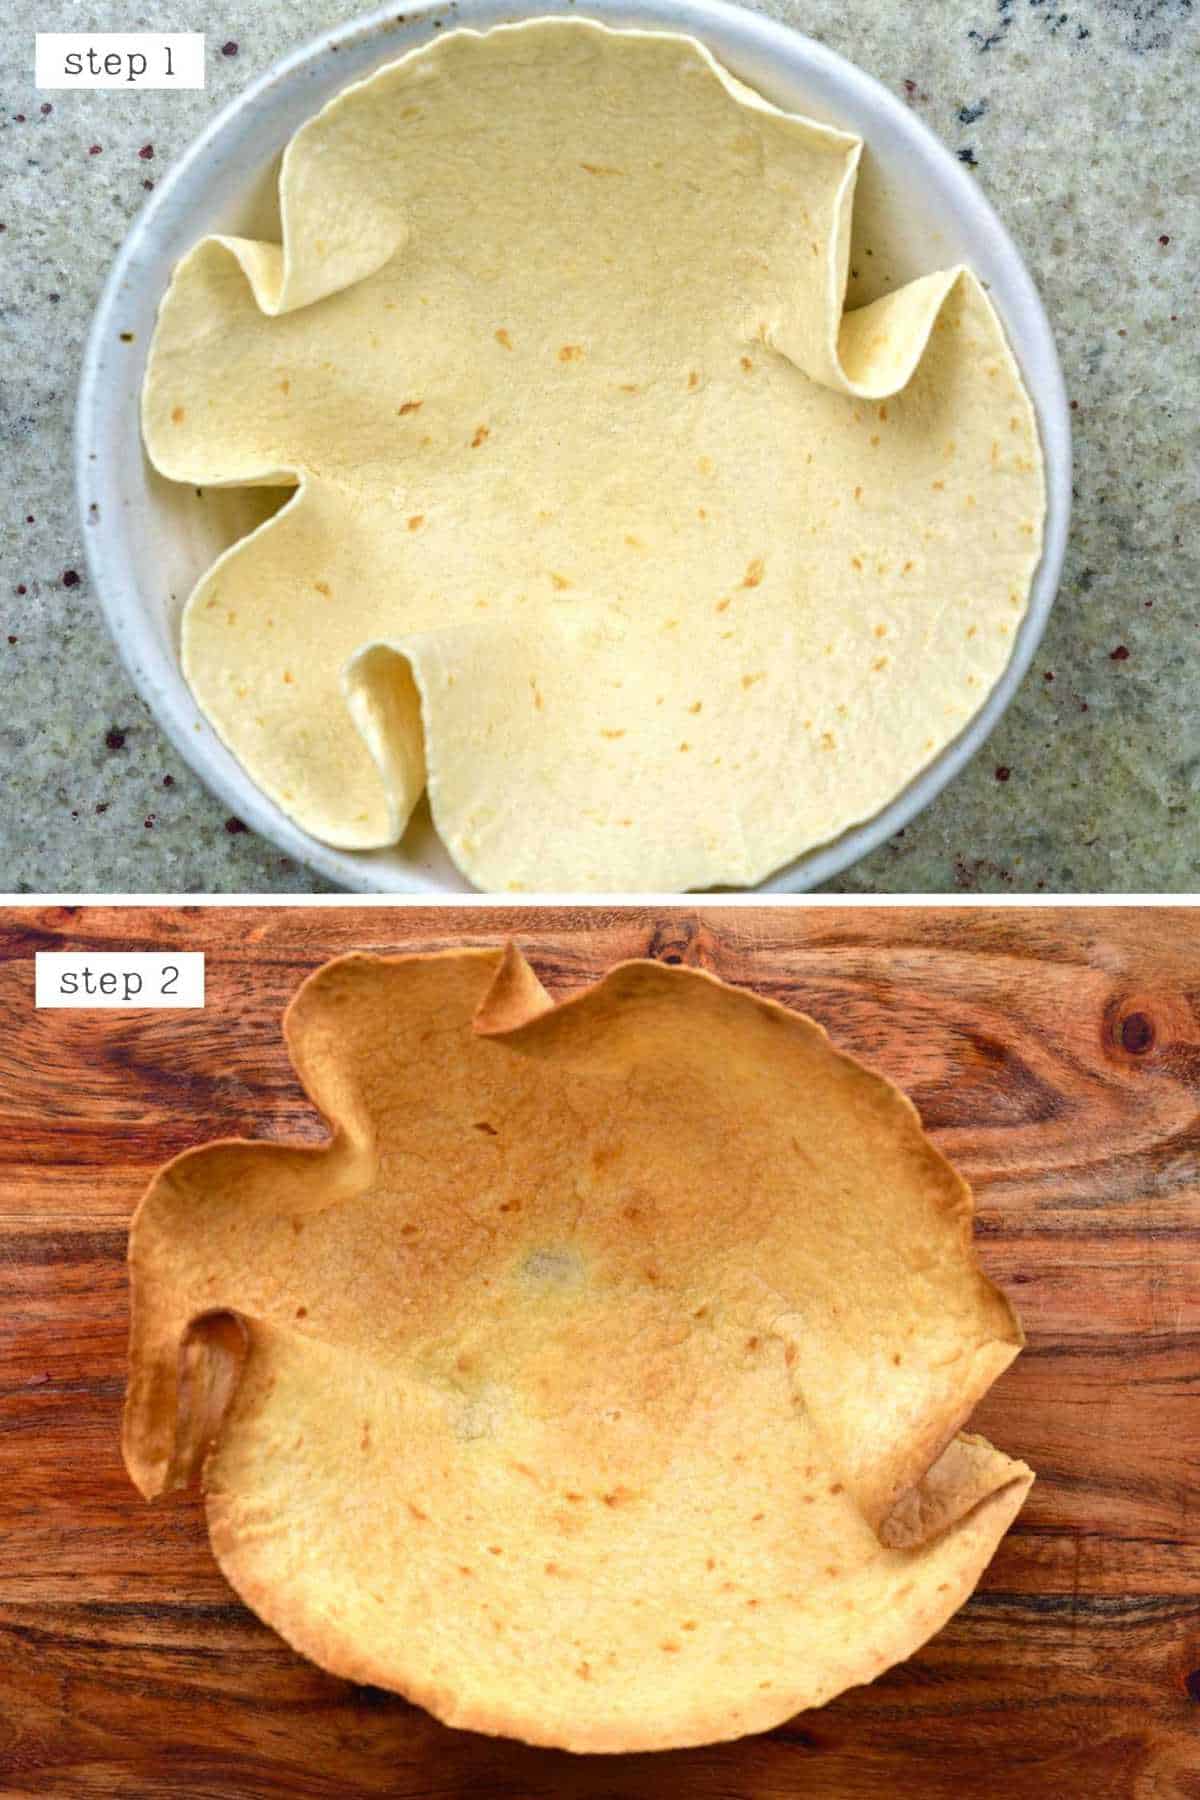 Steps for making a tortilla bowl